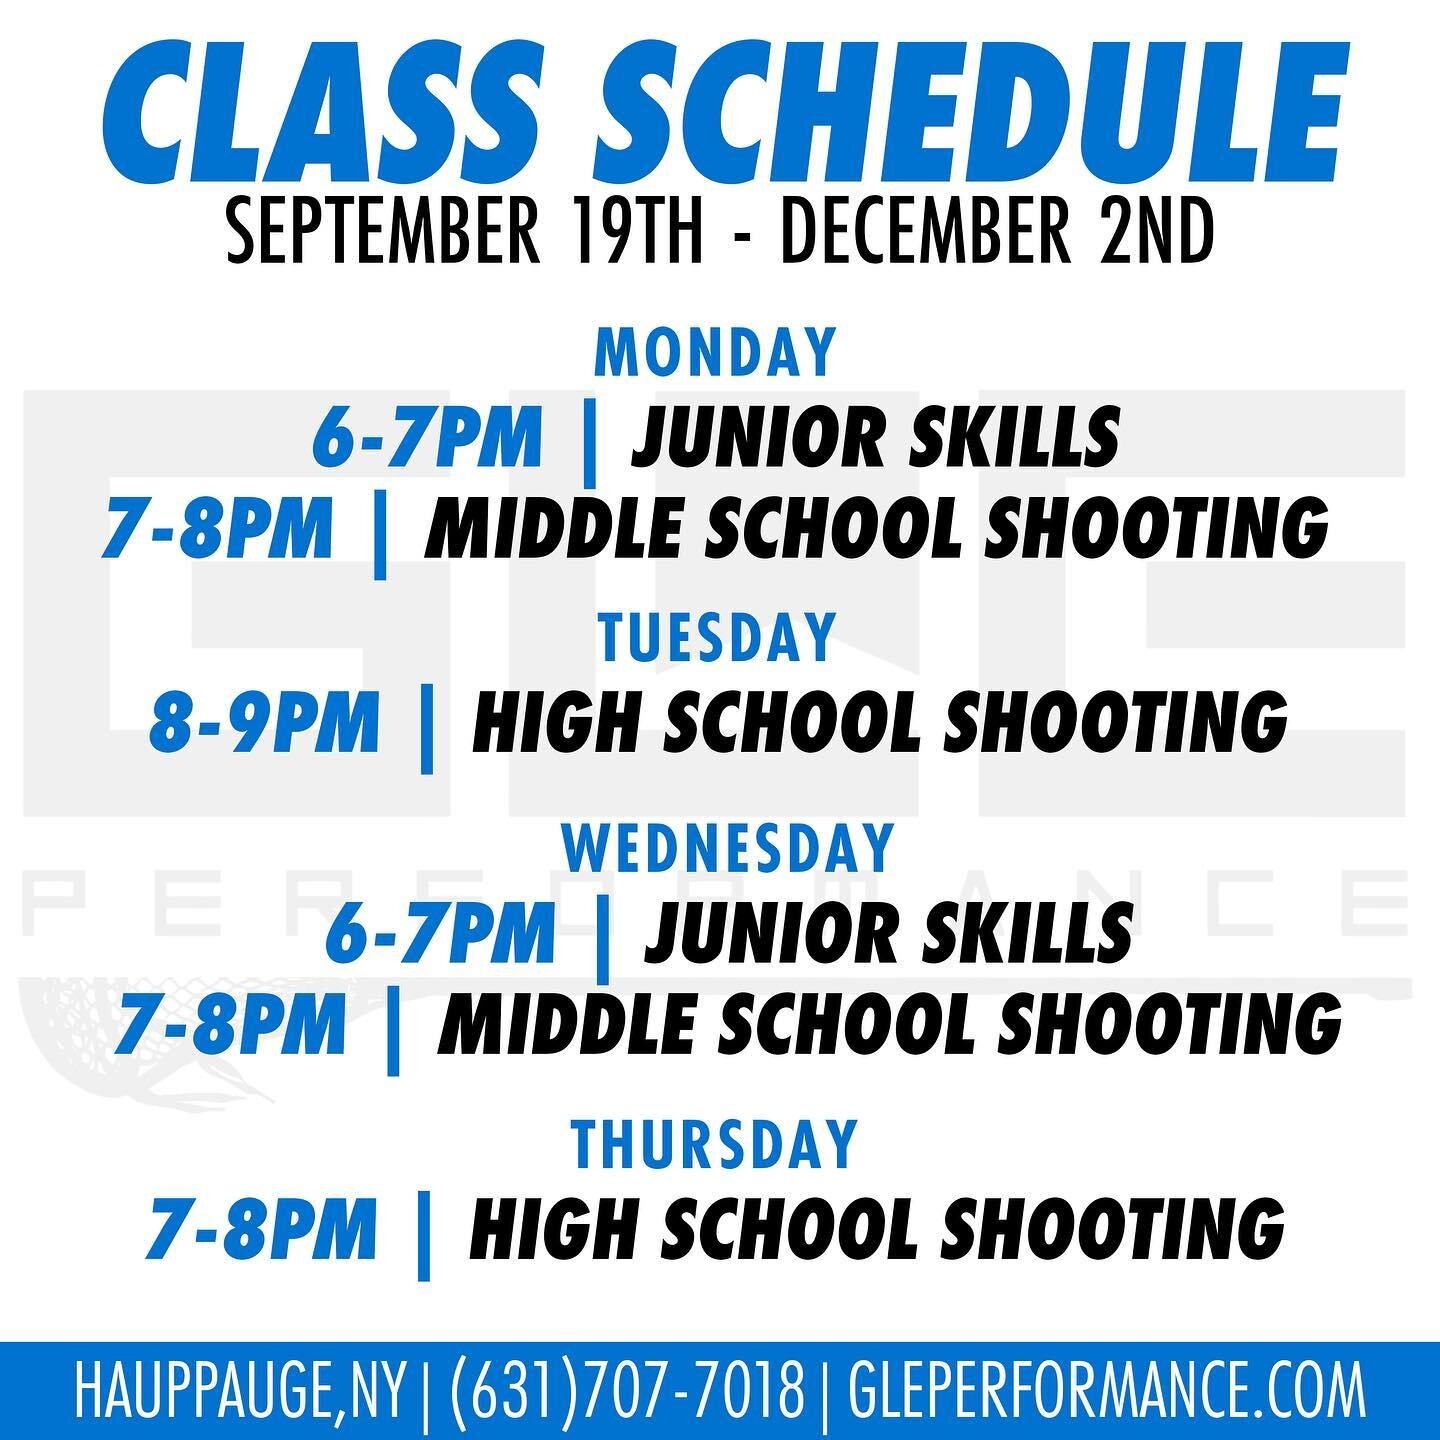 🚨 GLE FALL CLASS SCHEDULE 🚨 
Classes every week Monday - Thursday 📚 
All ages welcome both boys and girls 🥍 

🏭 REGISTER WITH THE LINK IN OUR BIO!

✉️ DM, EMAIL, or CALL WITH ANY INQUIRIES !!